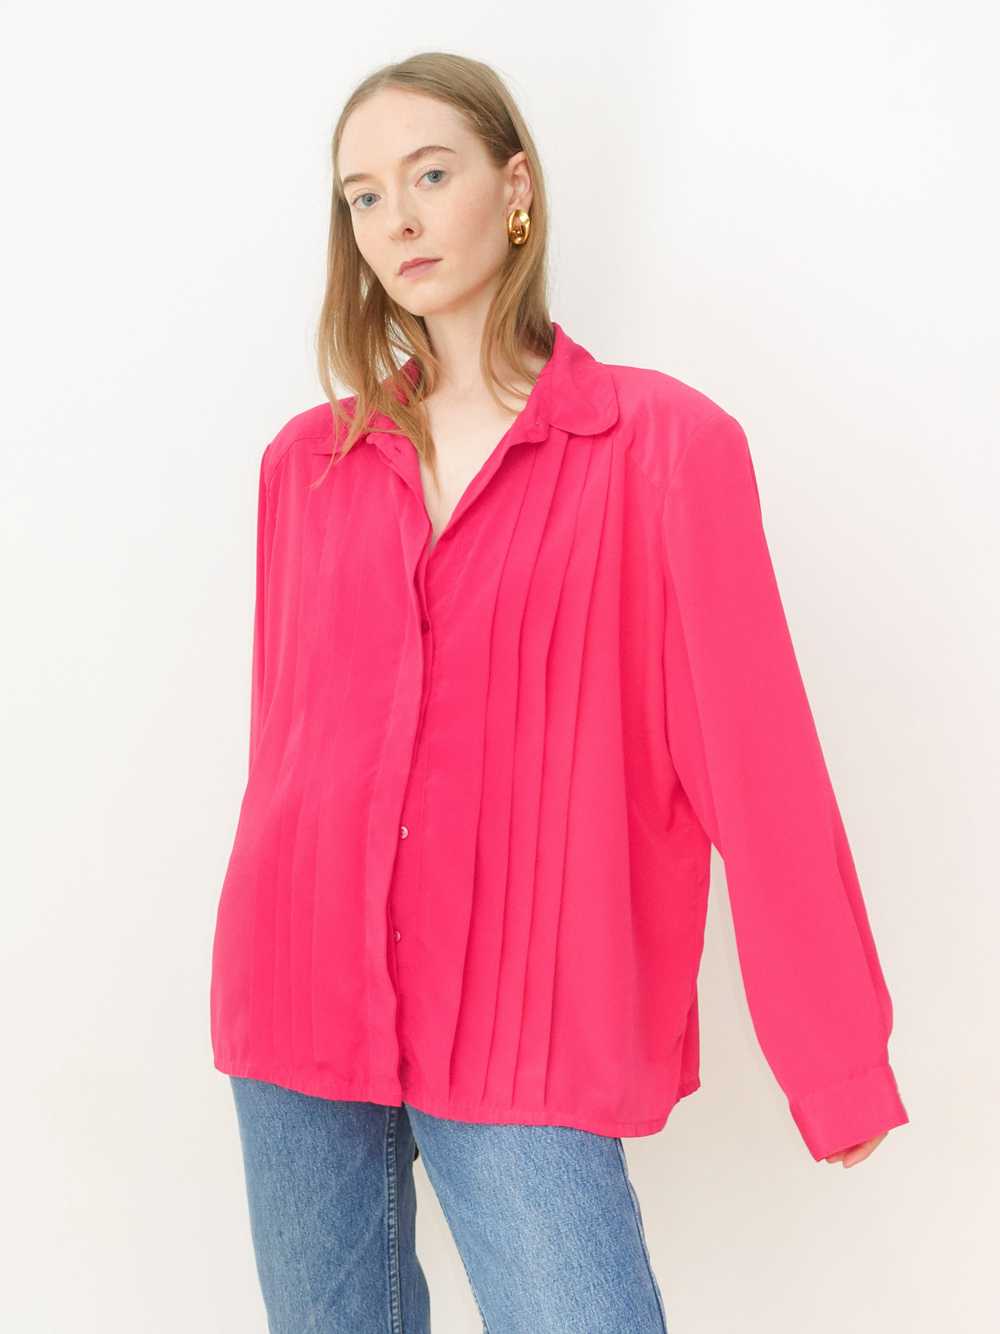 Magenta Pink Pleated Button Up Blouse - image 1